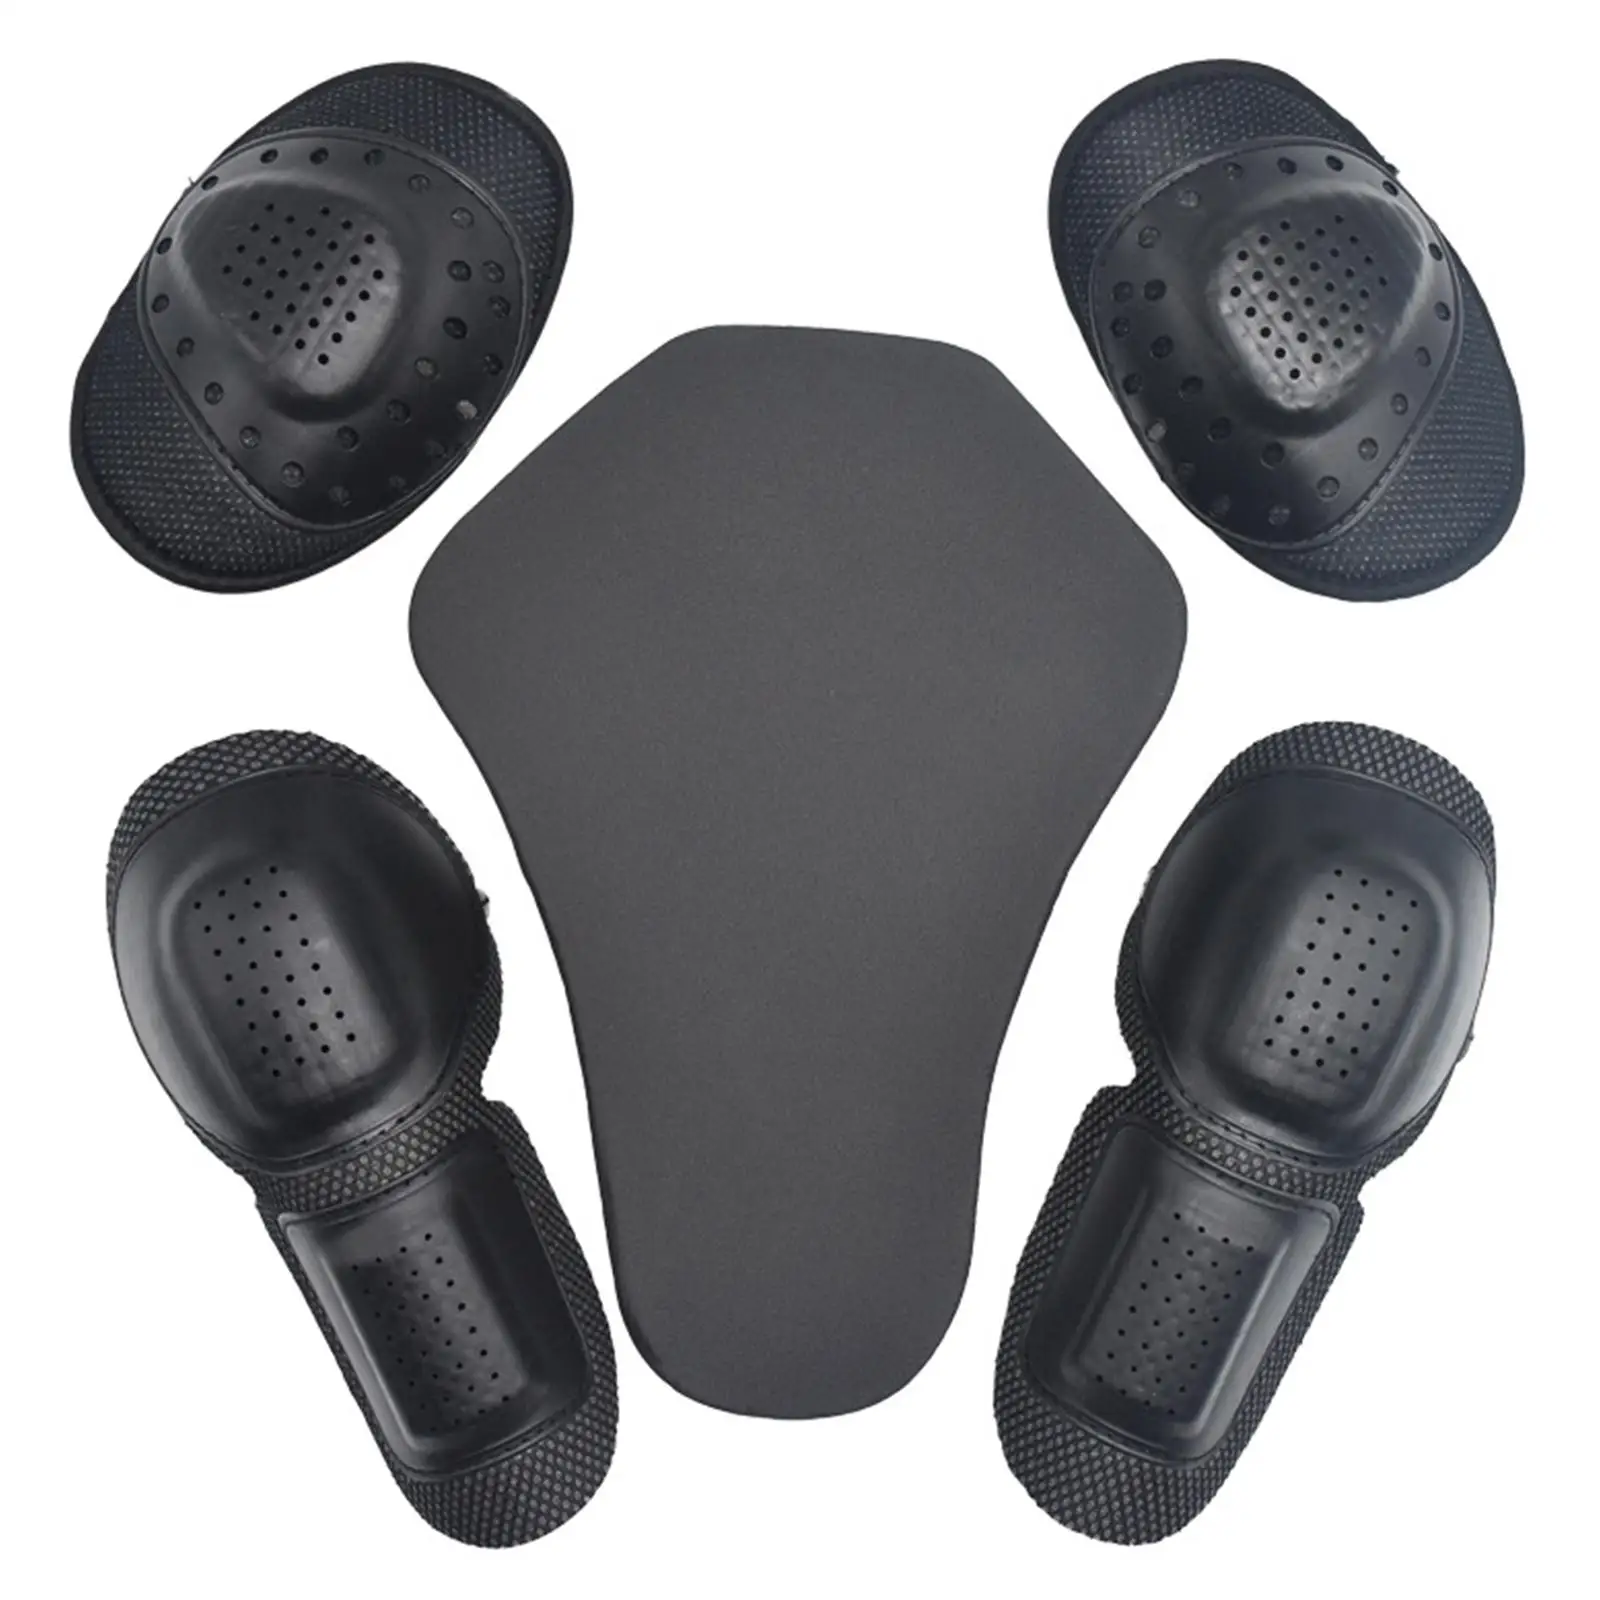 5x Riding Shoulder Protector, Motorcycle Accessories, Motorbike Protection,